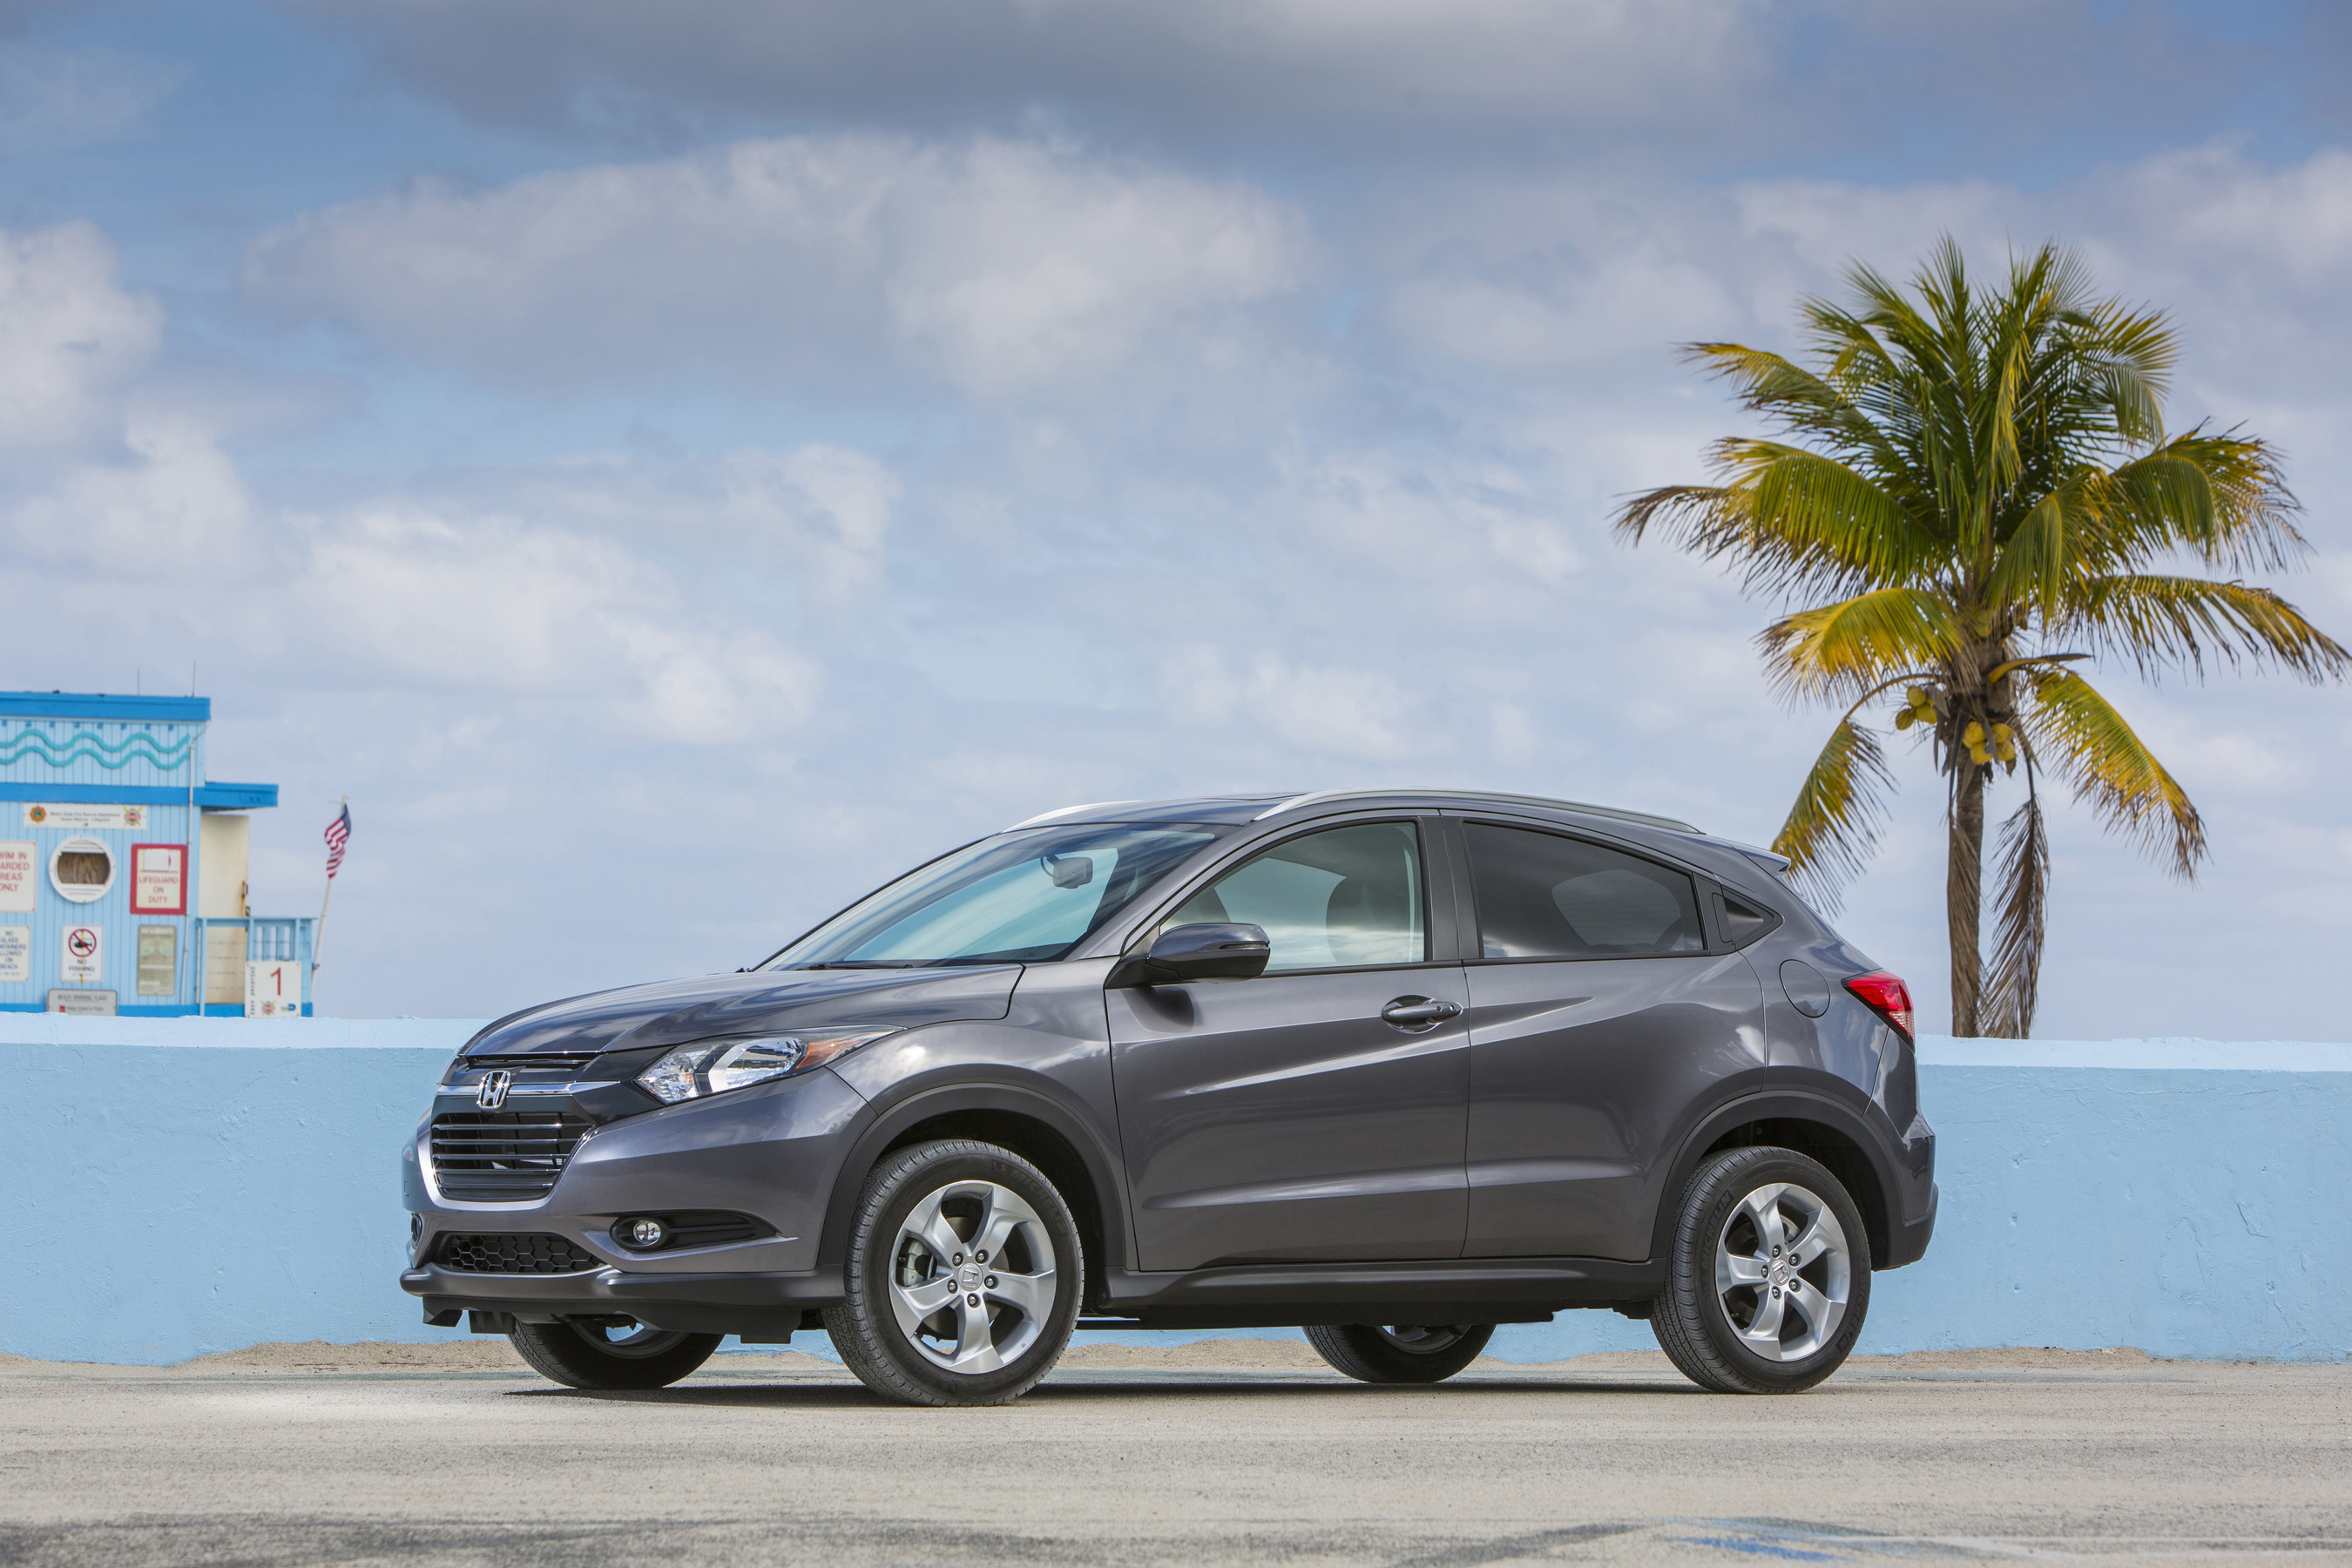 The Uniquely Personal and Functional 2016 Honda HR-V Goes On Sale May 15 Bringing a Shot of Energy to Growing Entry Crossover Market